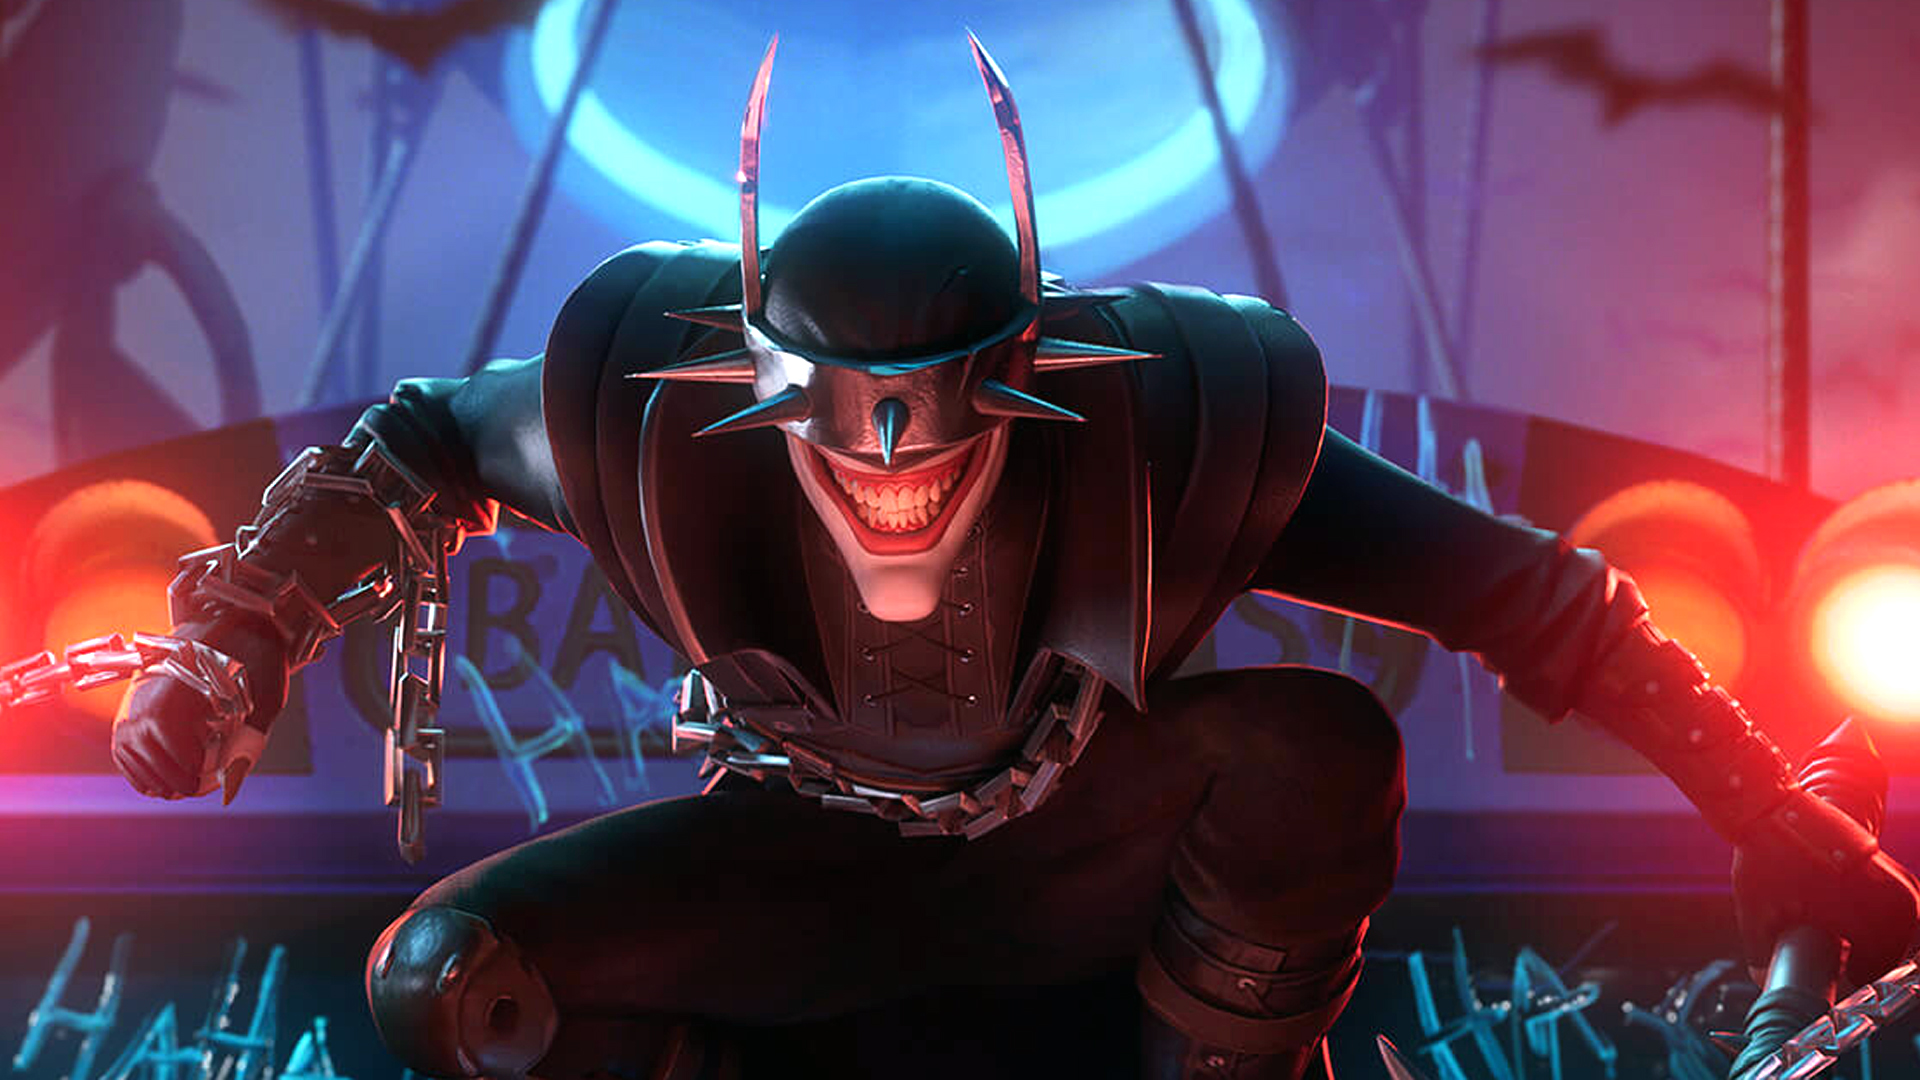 The Batman Who Laughs Fortnite Skin Is Creepiest Yet, 40% OFF